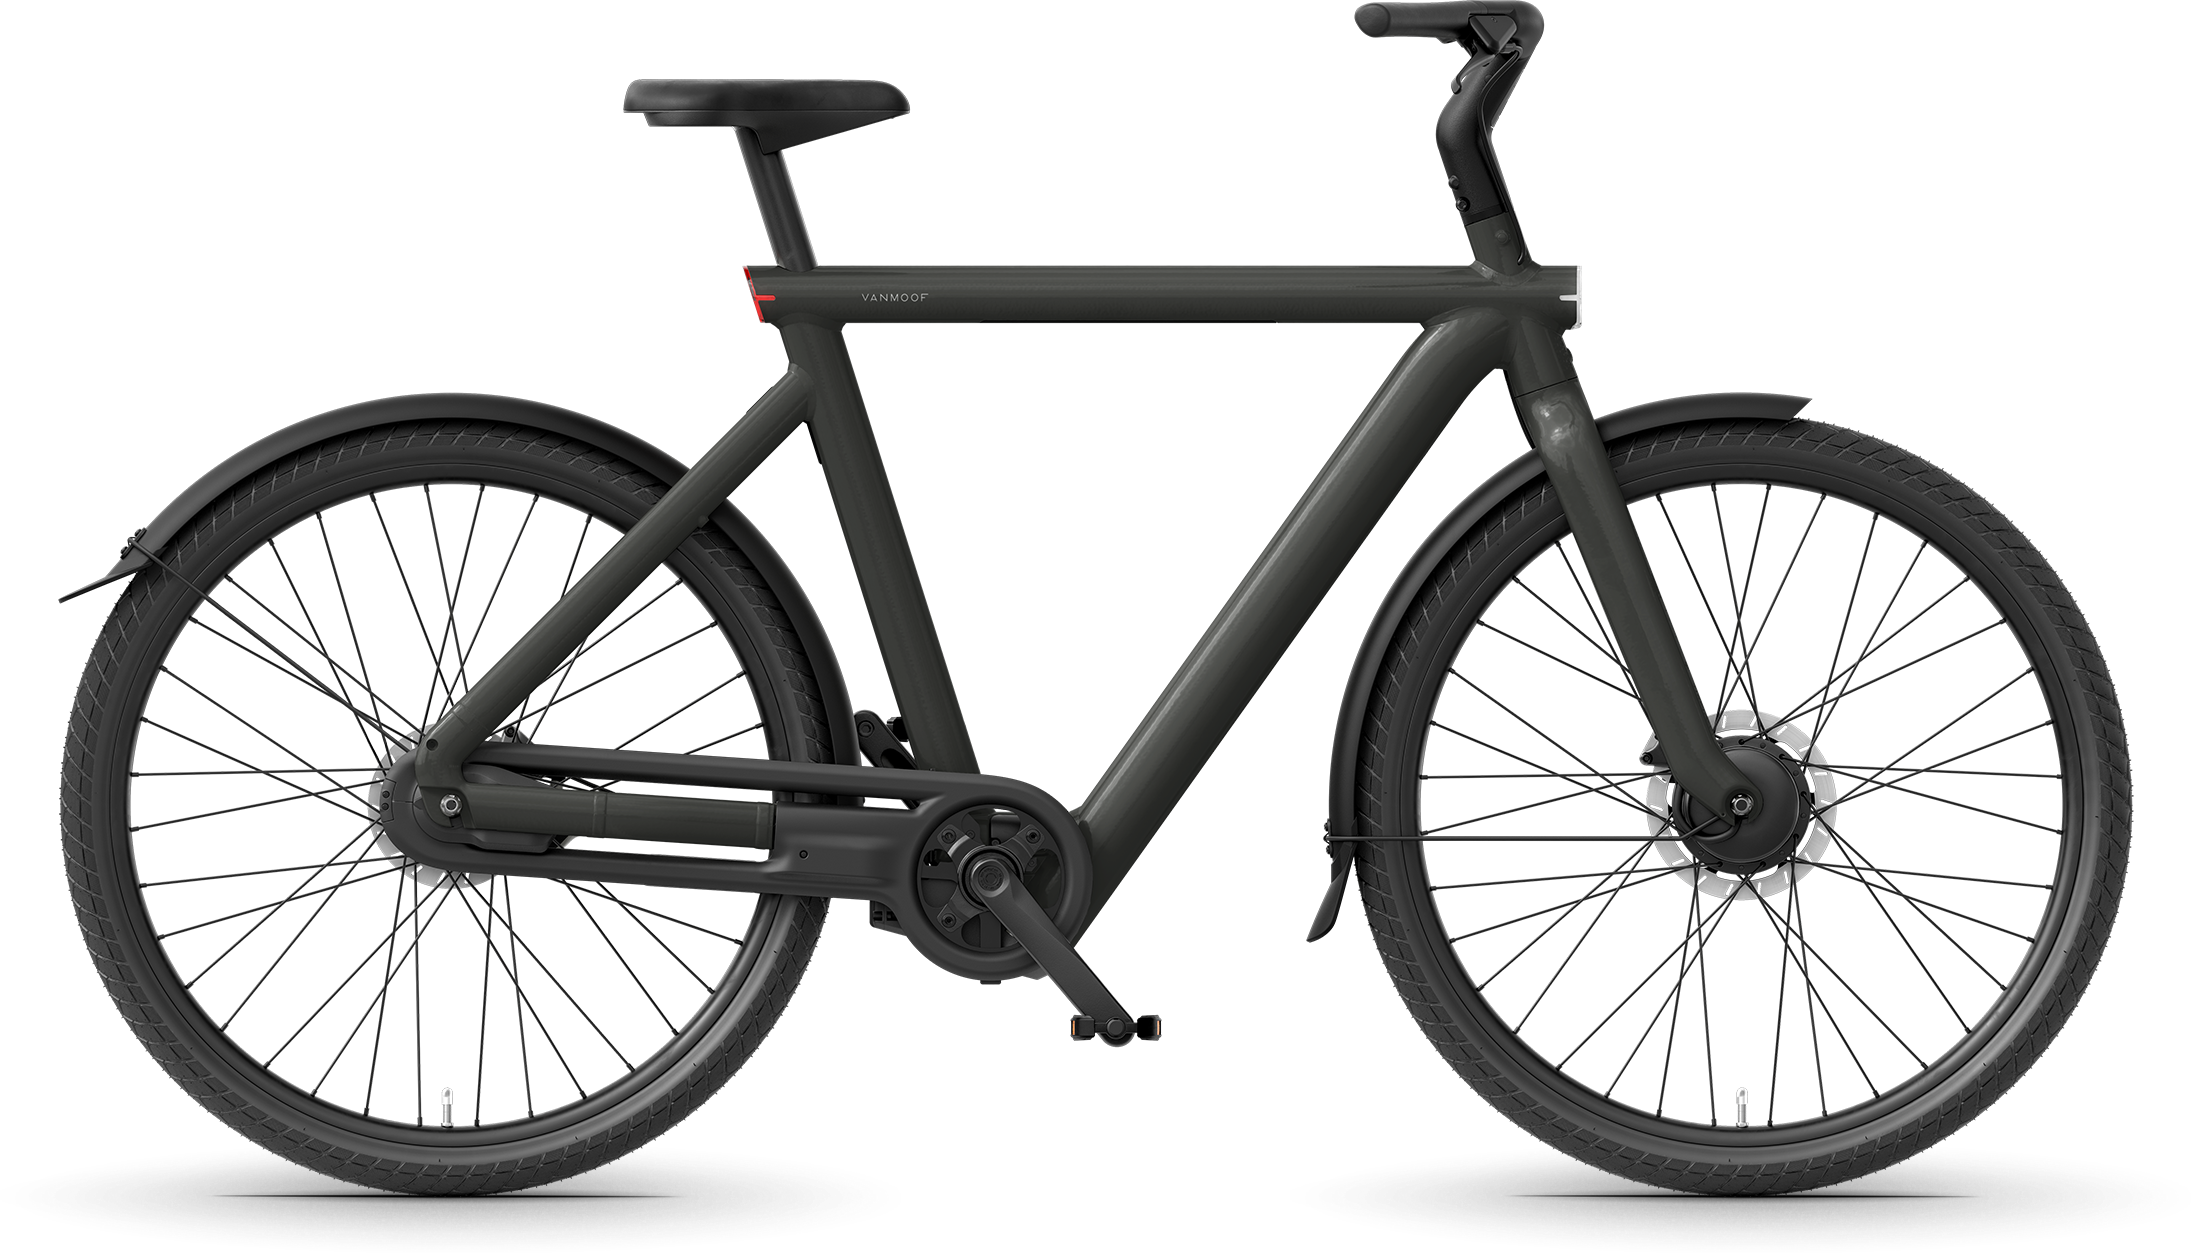 a rendering of a well-designed city bike